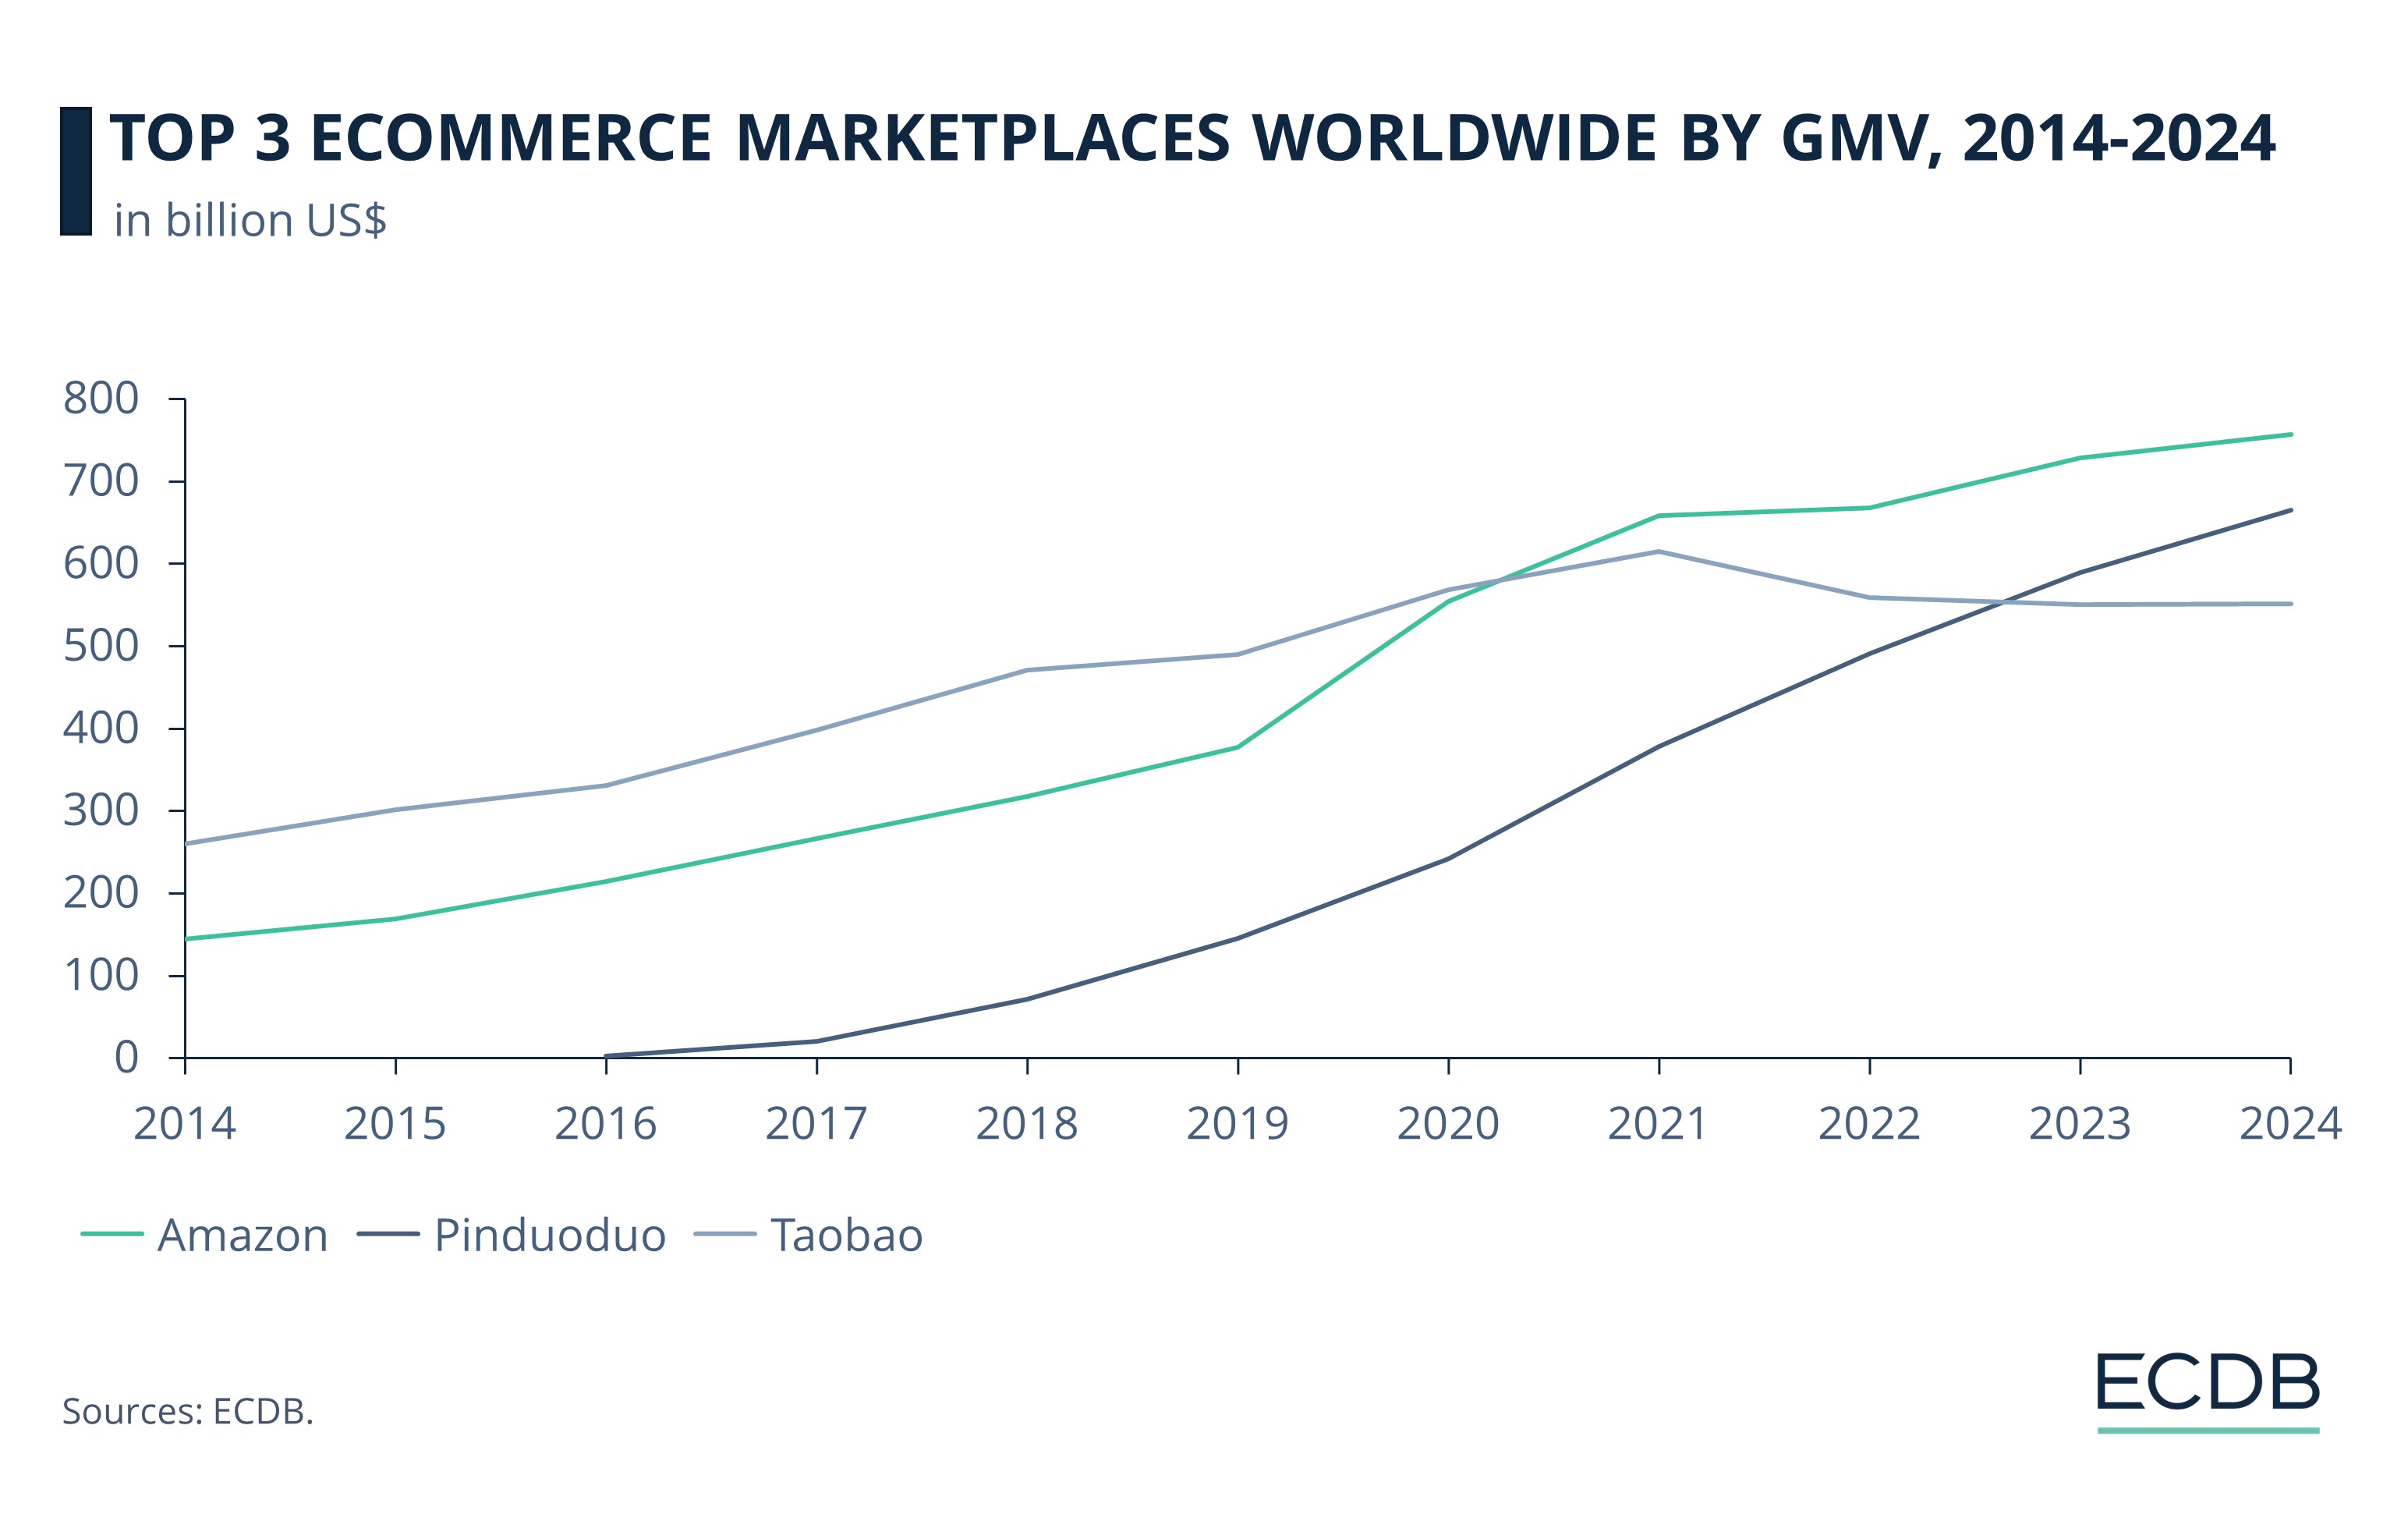 Top 3 eCommerce Marketplaces Worldwide by GMV, 2014-2024